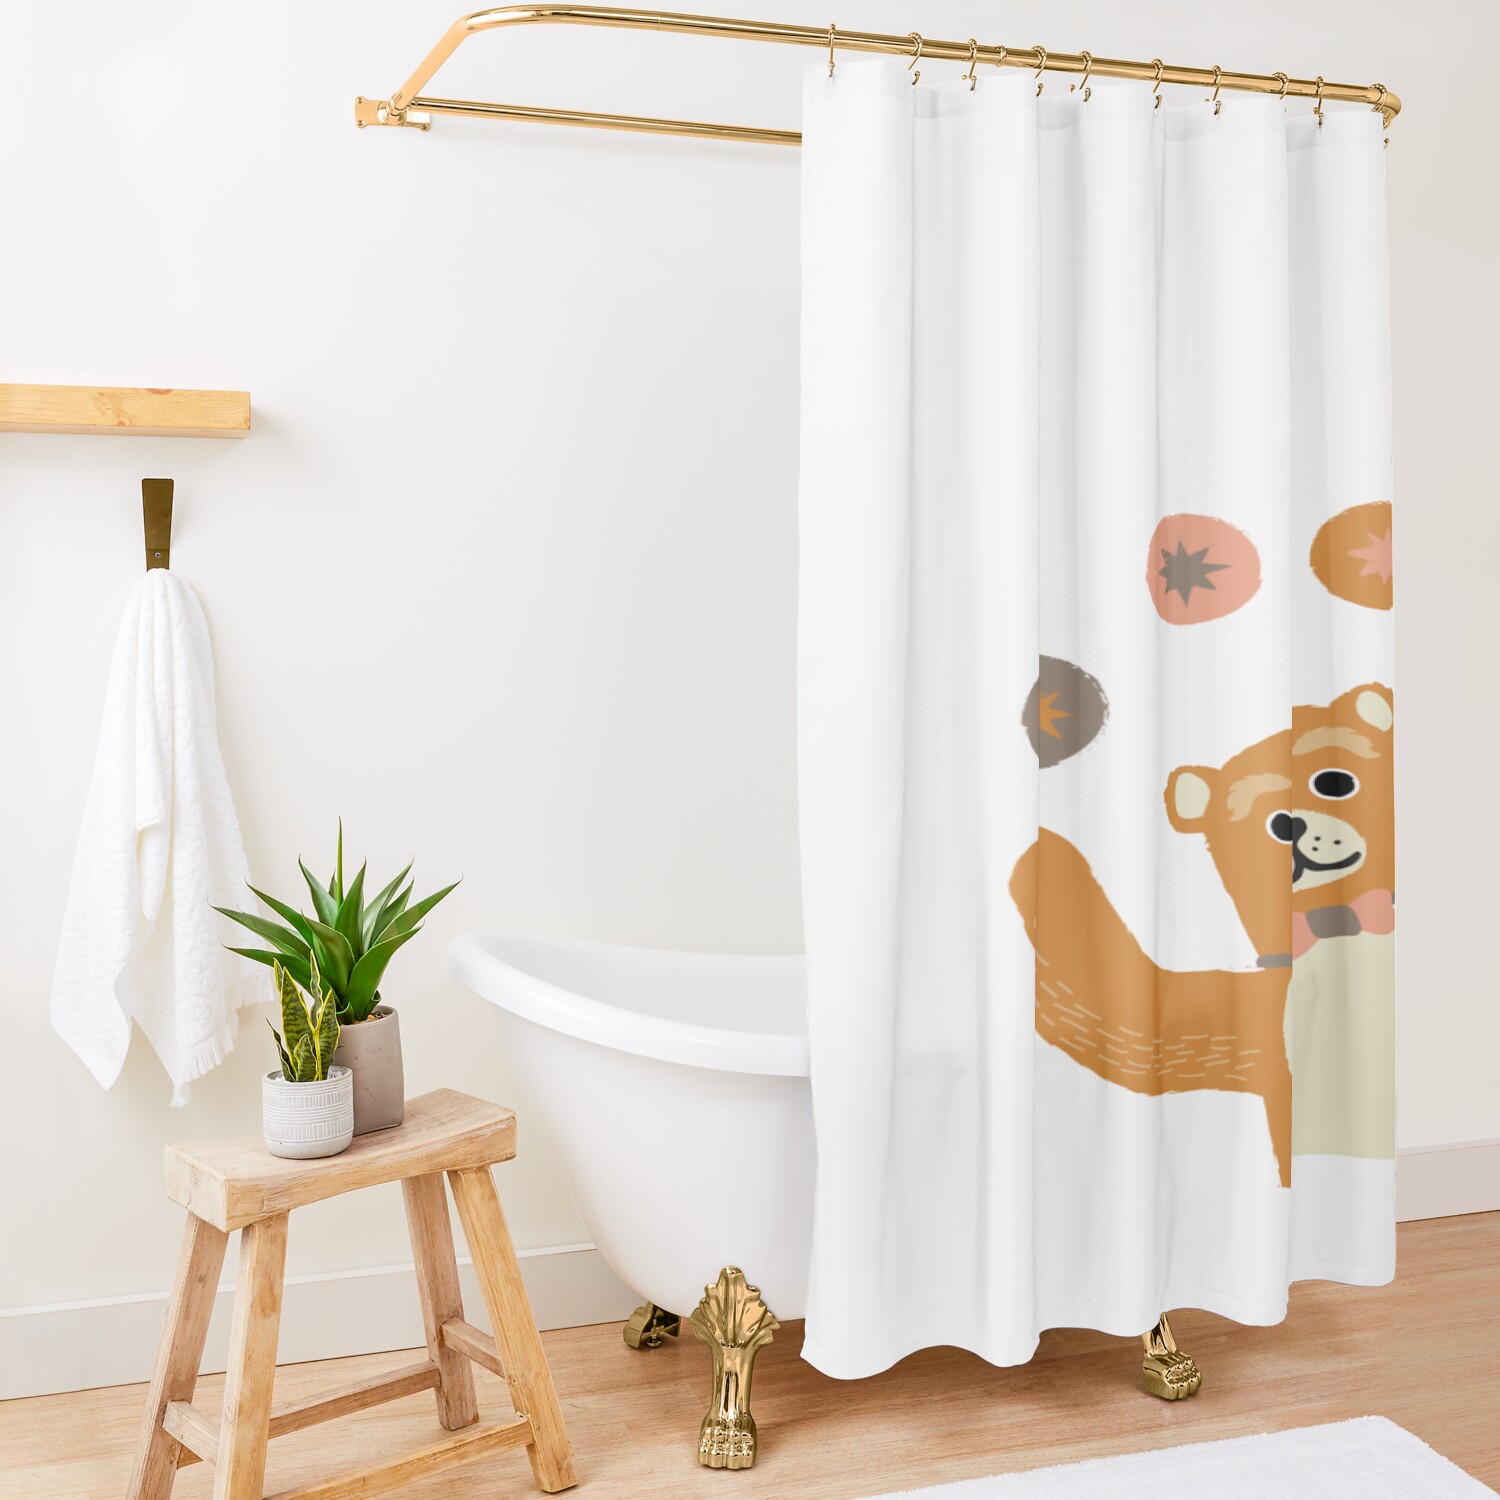 urshower curtain opensquare1500x1500 4 - Disguised Toast Shop